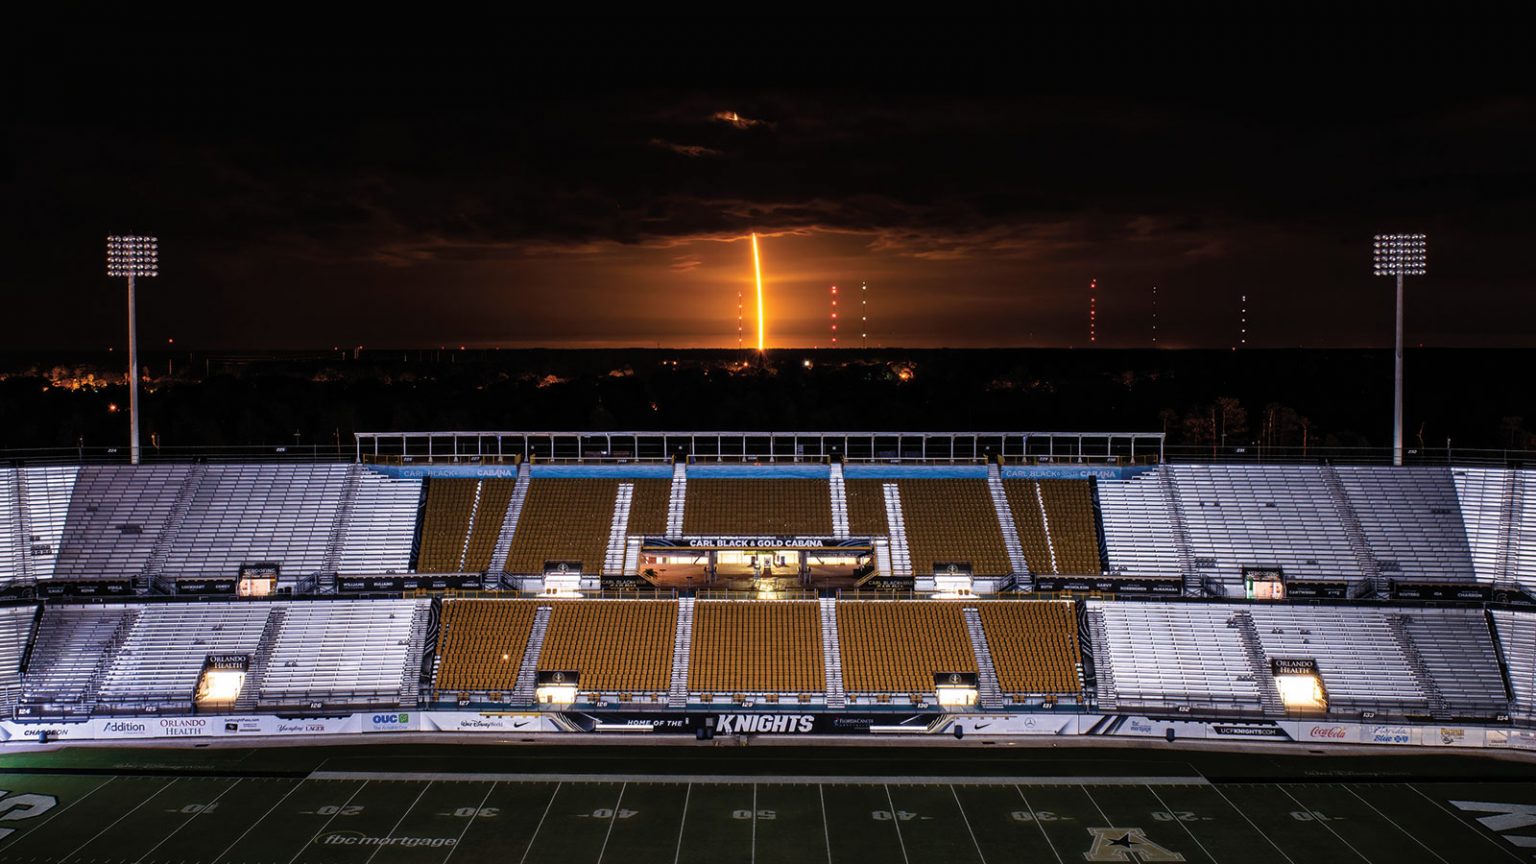 A rocket launch view from UCF's football stadium